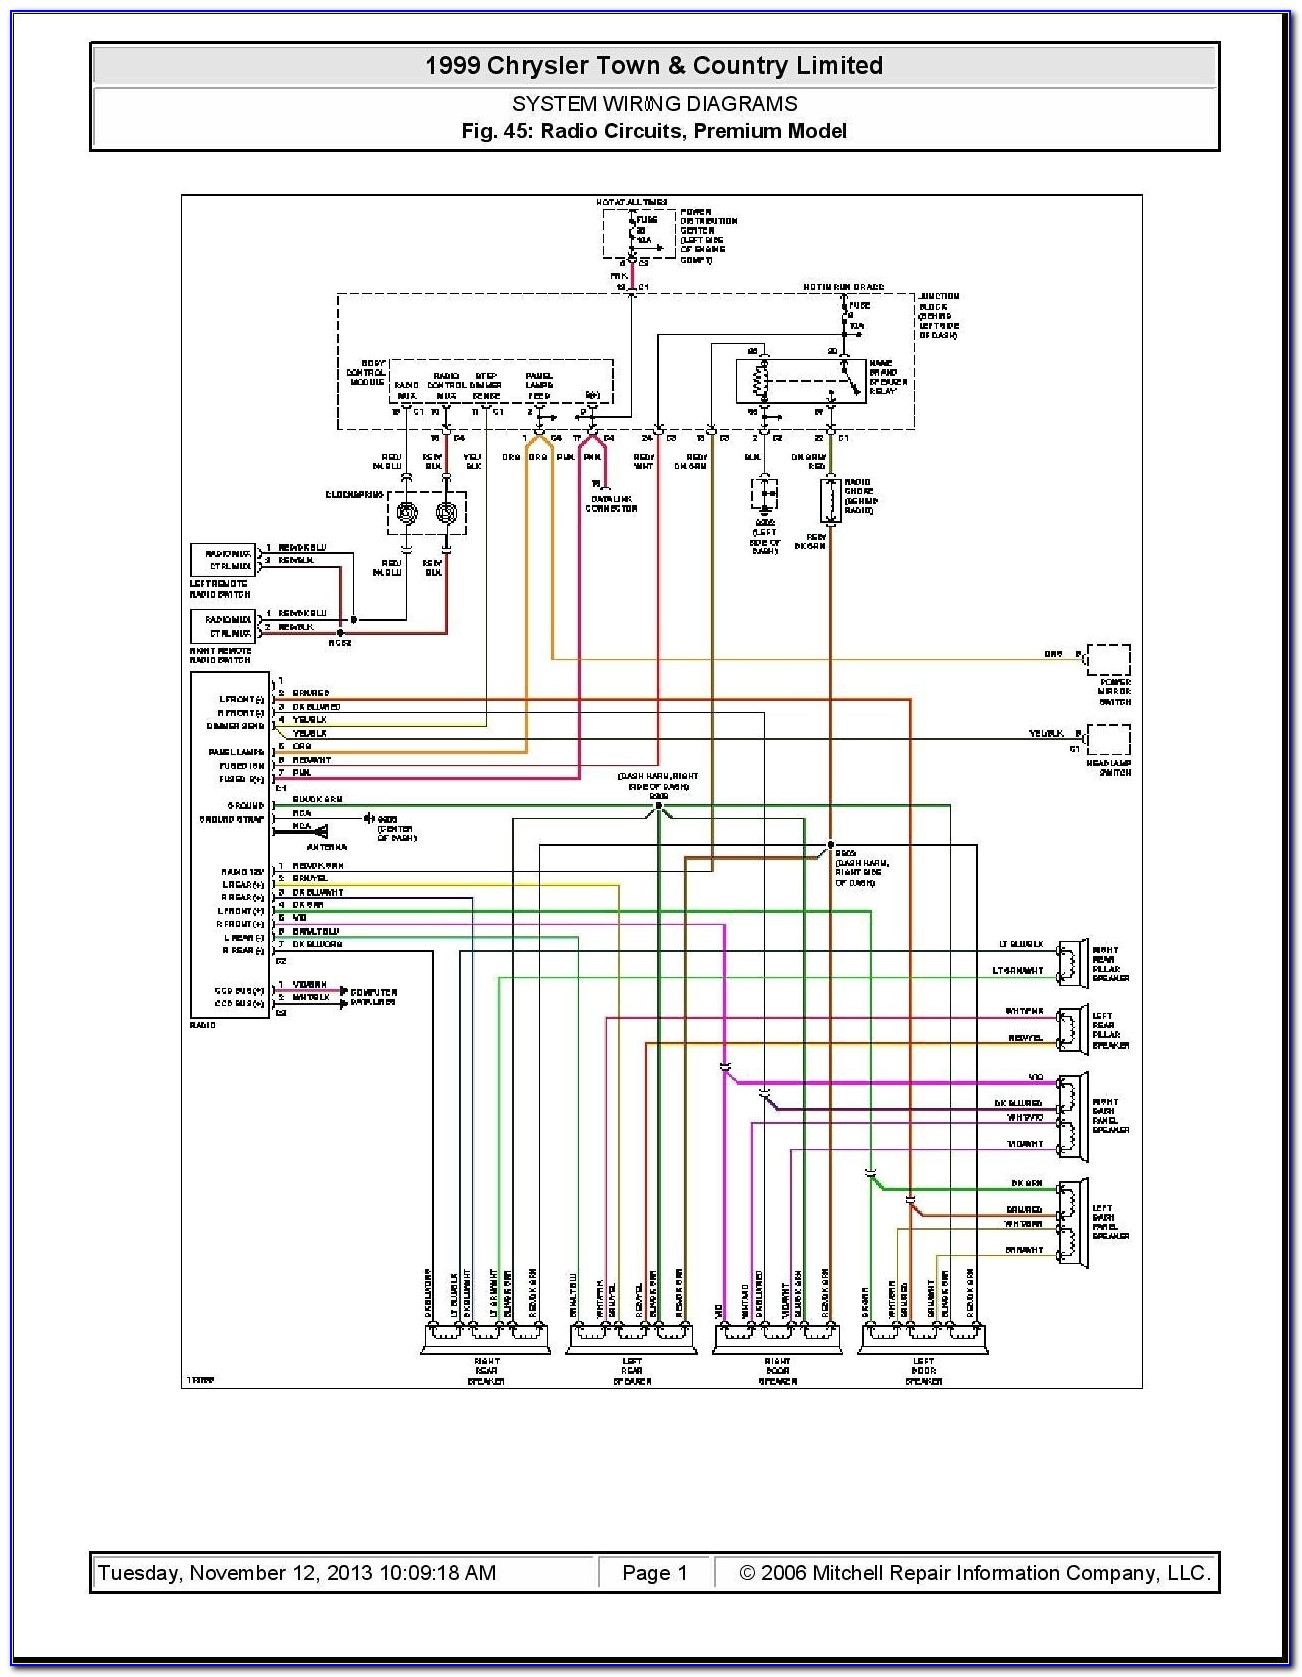 2002 Chrysler Town And Country Stereo Wiring Diagram